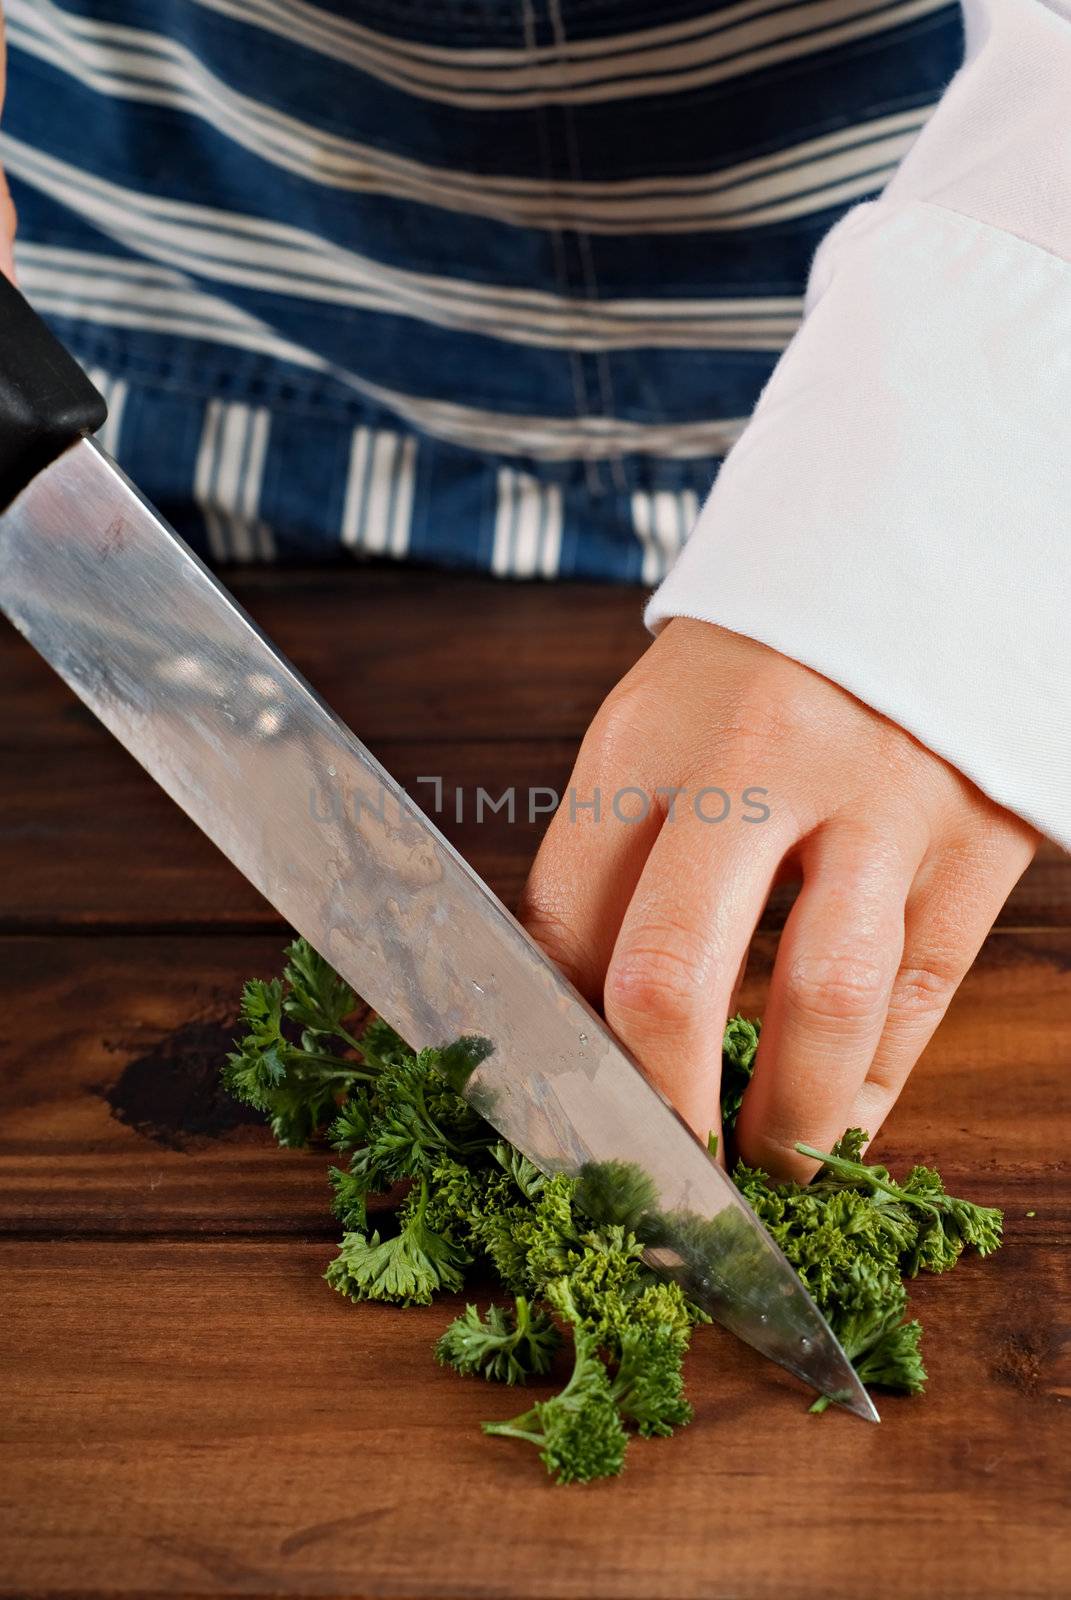 Chopping parsley by alistaircotton